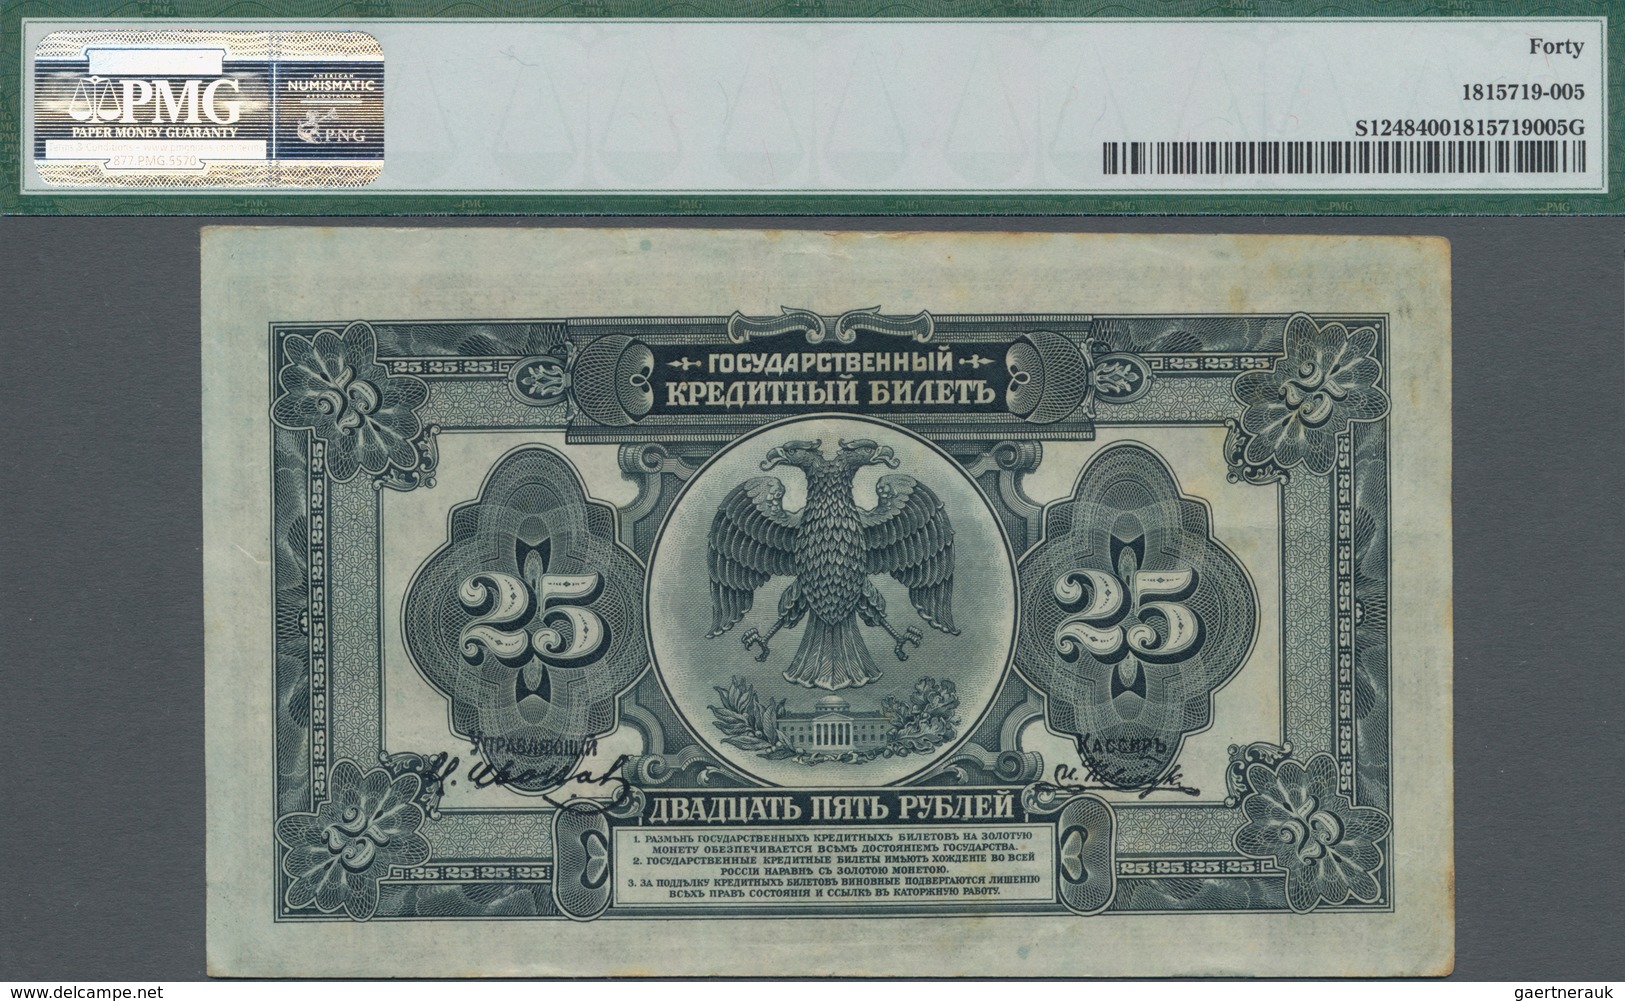 Russia / Russland: East Siberia - Primorye Region, 25 Rubles ND(1920) Far East Provisional Governmen - Russland